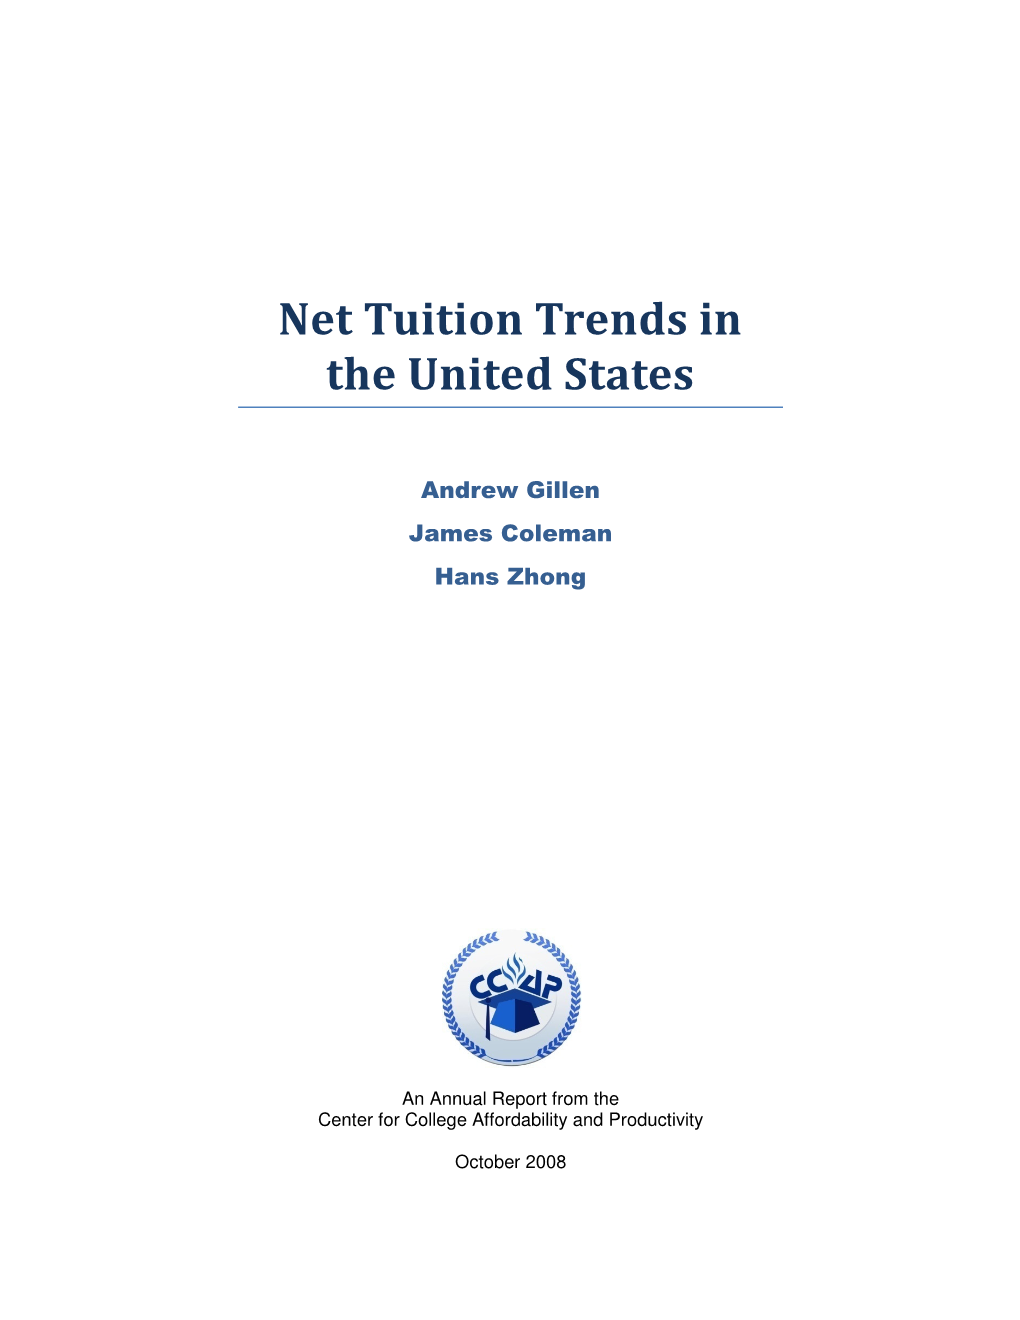 Net Tuition Trends in the United States